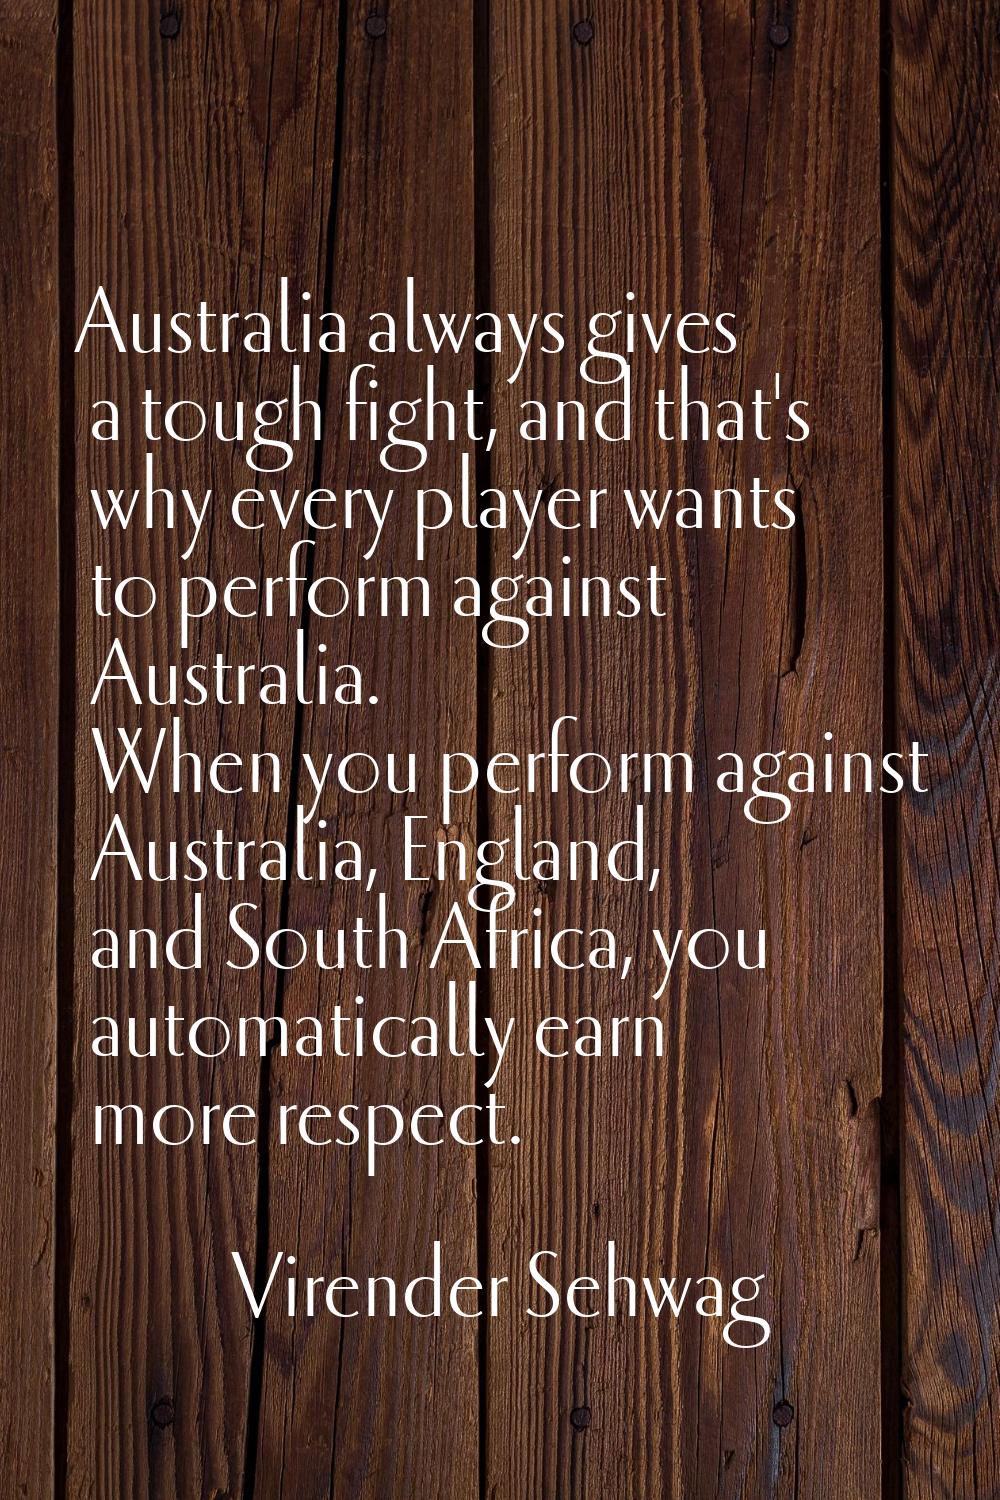 Australia always gives a tough fight, and that's why every player wants to perform against Australi